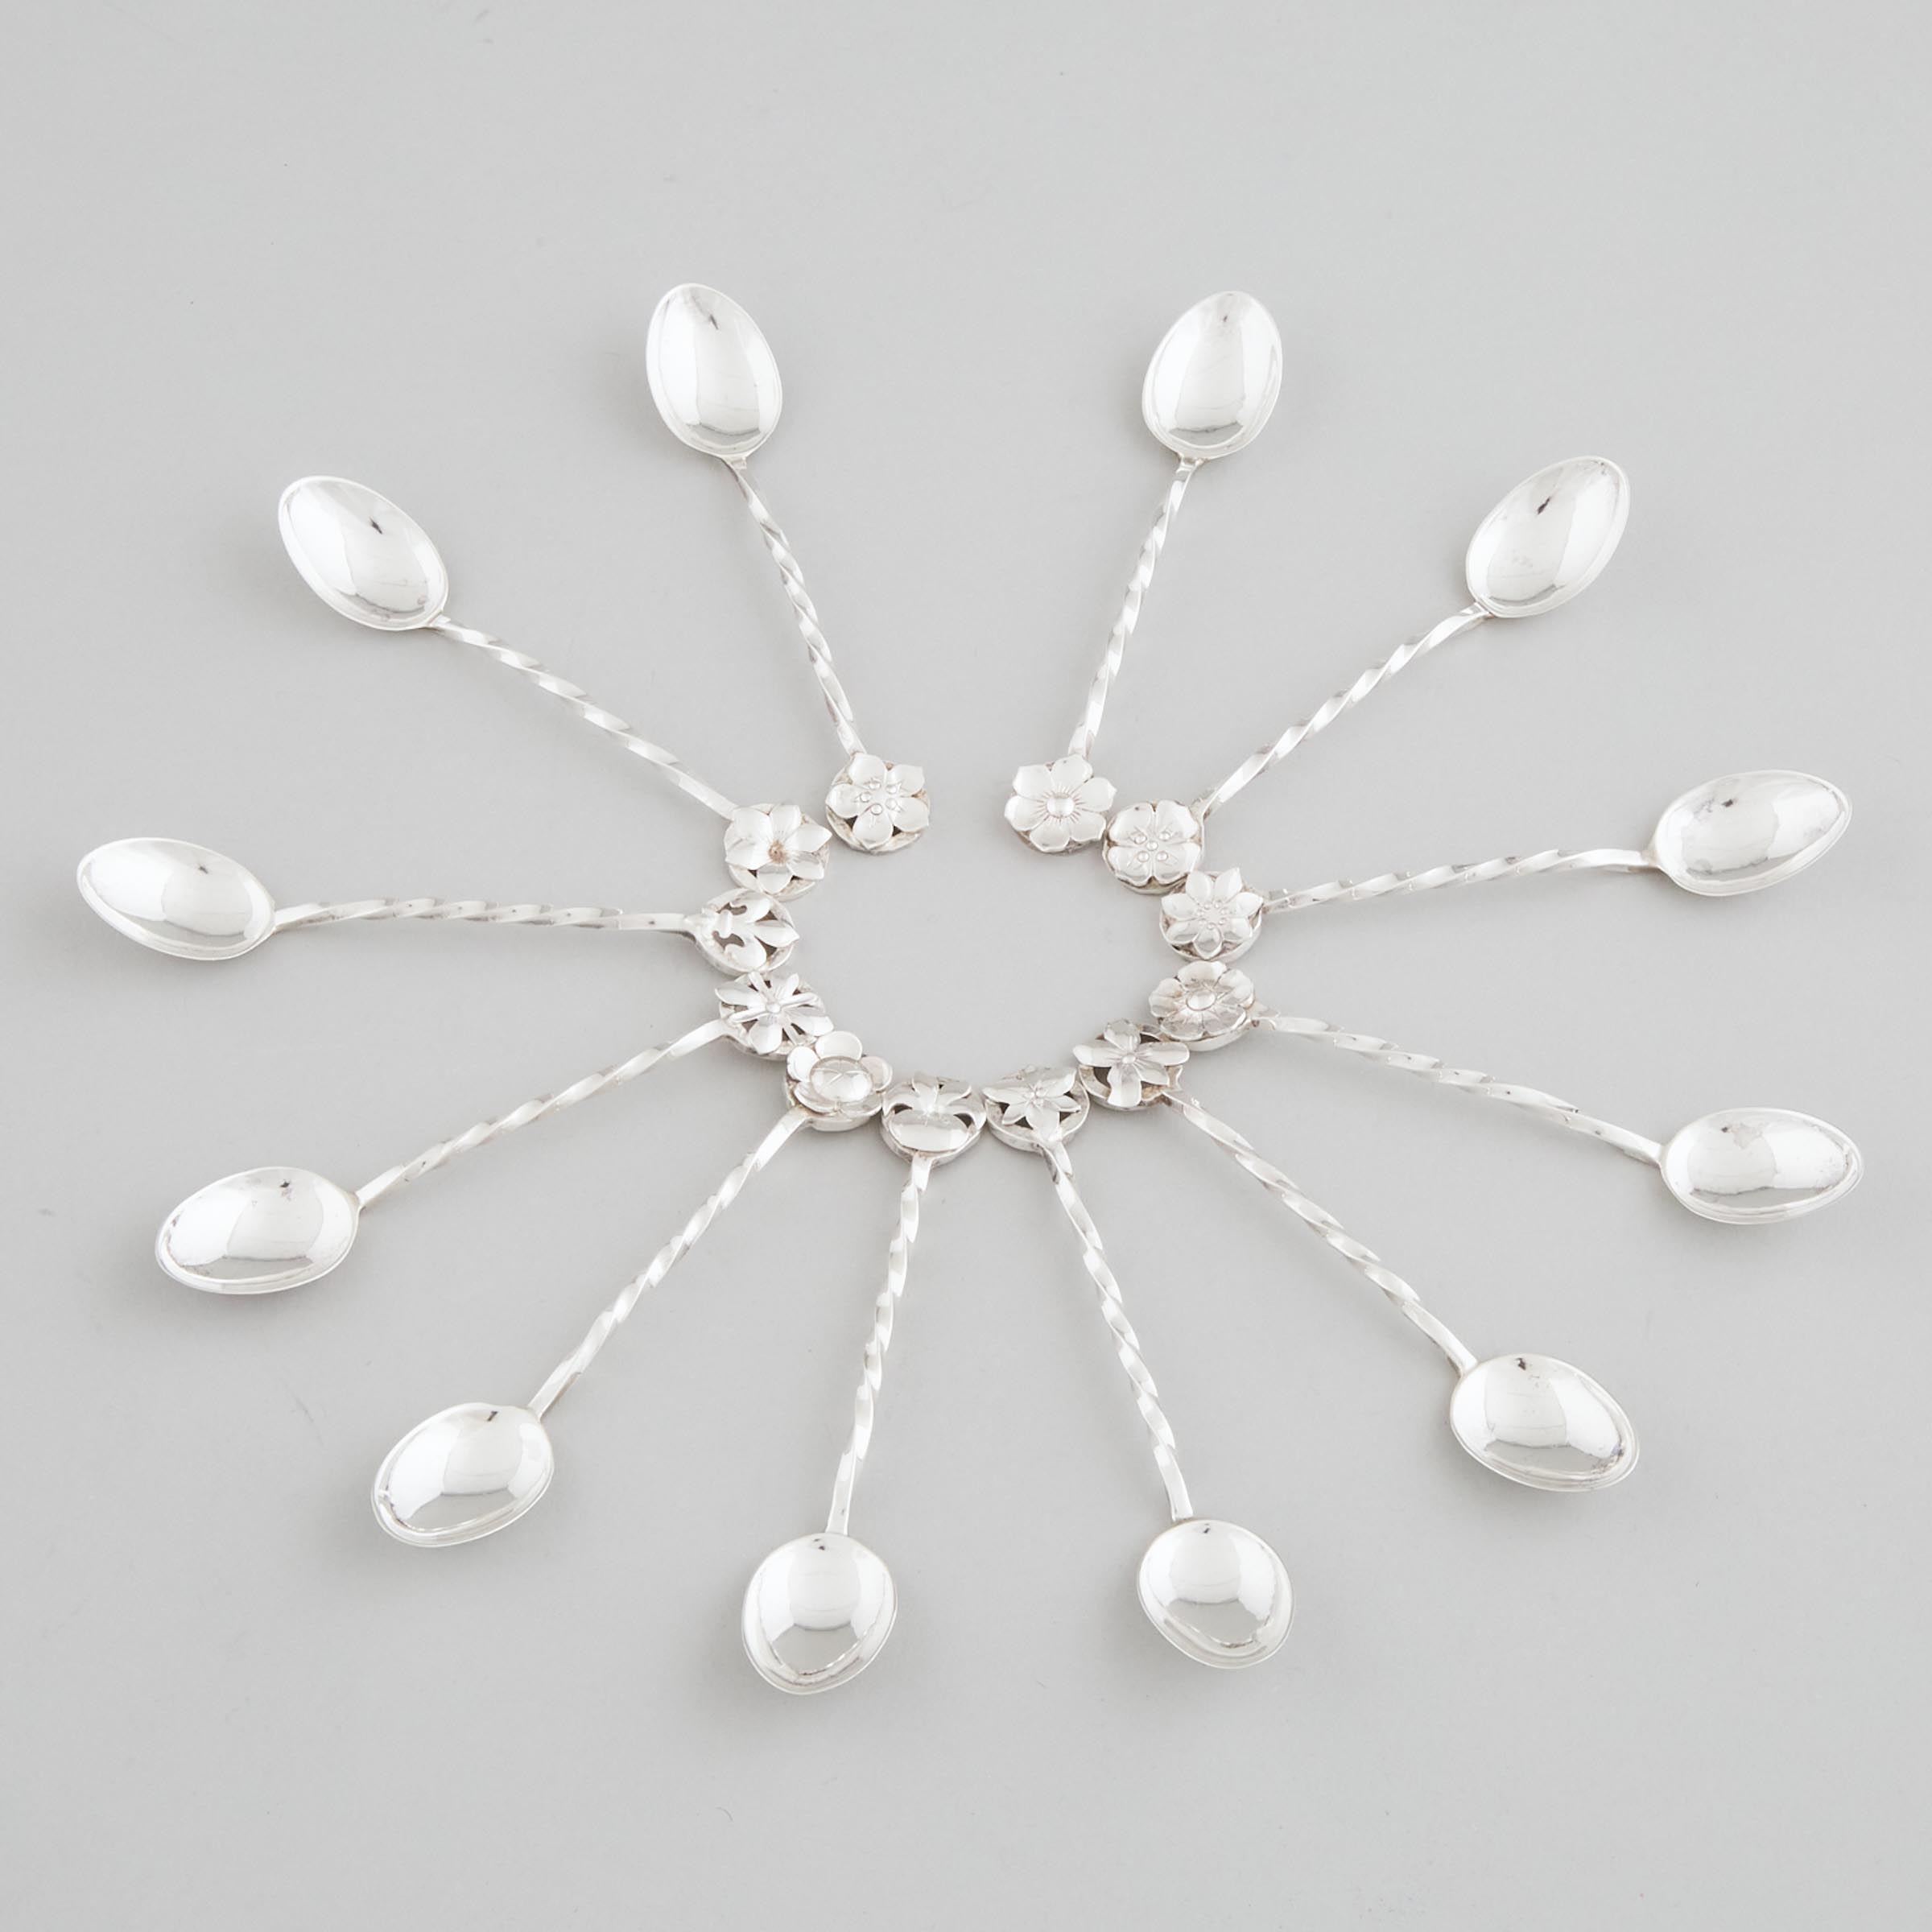 Set of Twelve Canadian Silver Provincial Flowers Coffee Spoons, Andrew Fussell, Toronto, 1968